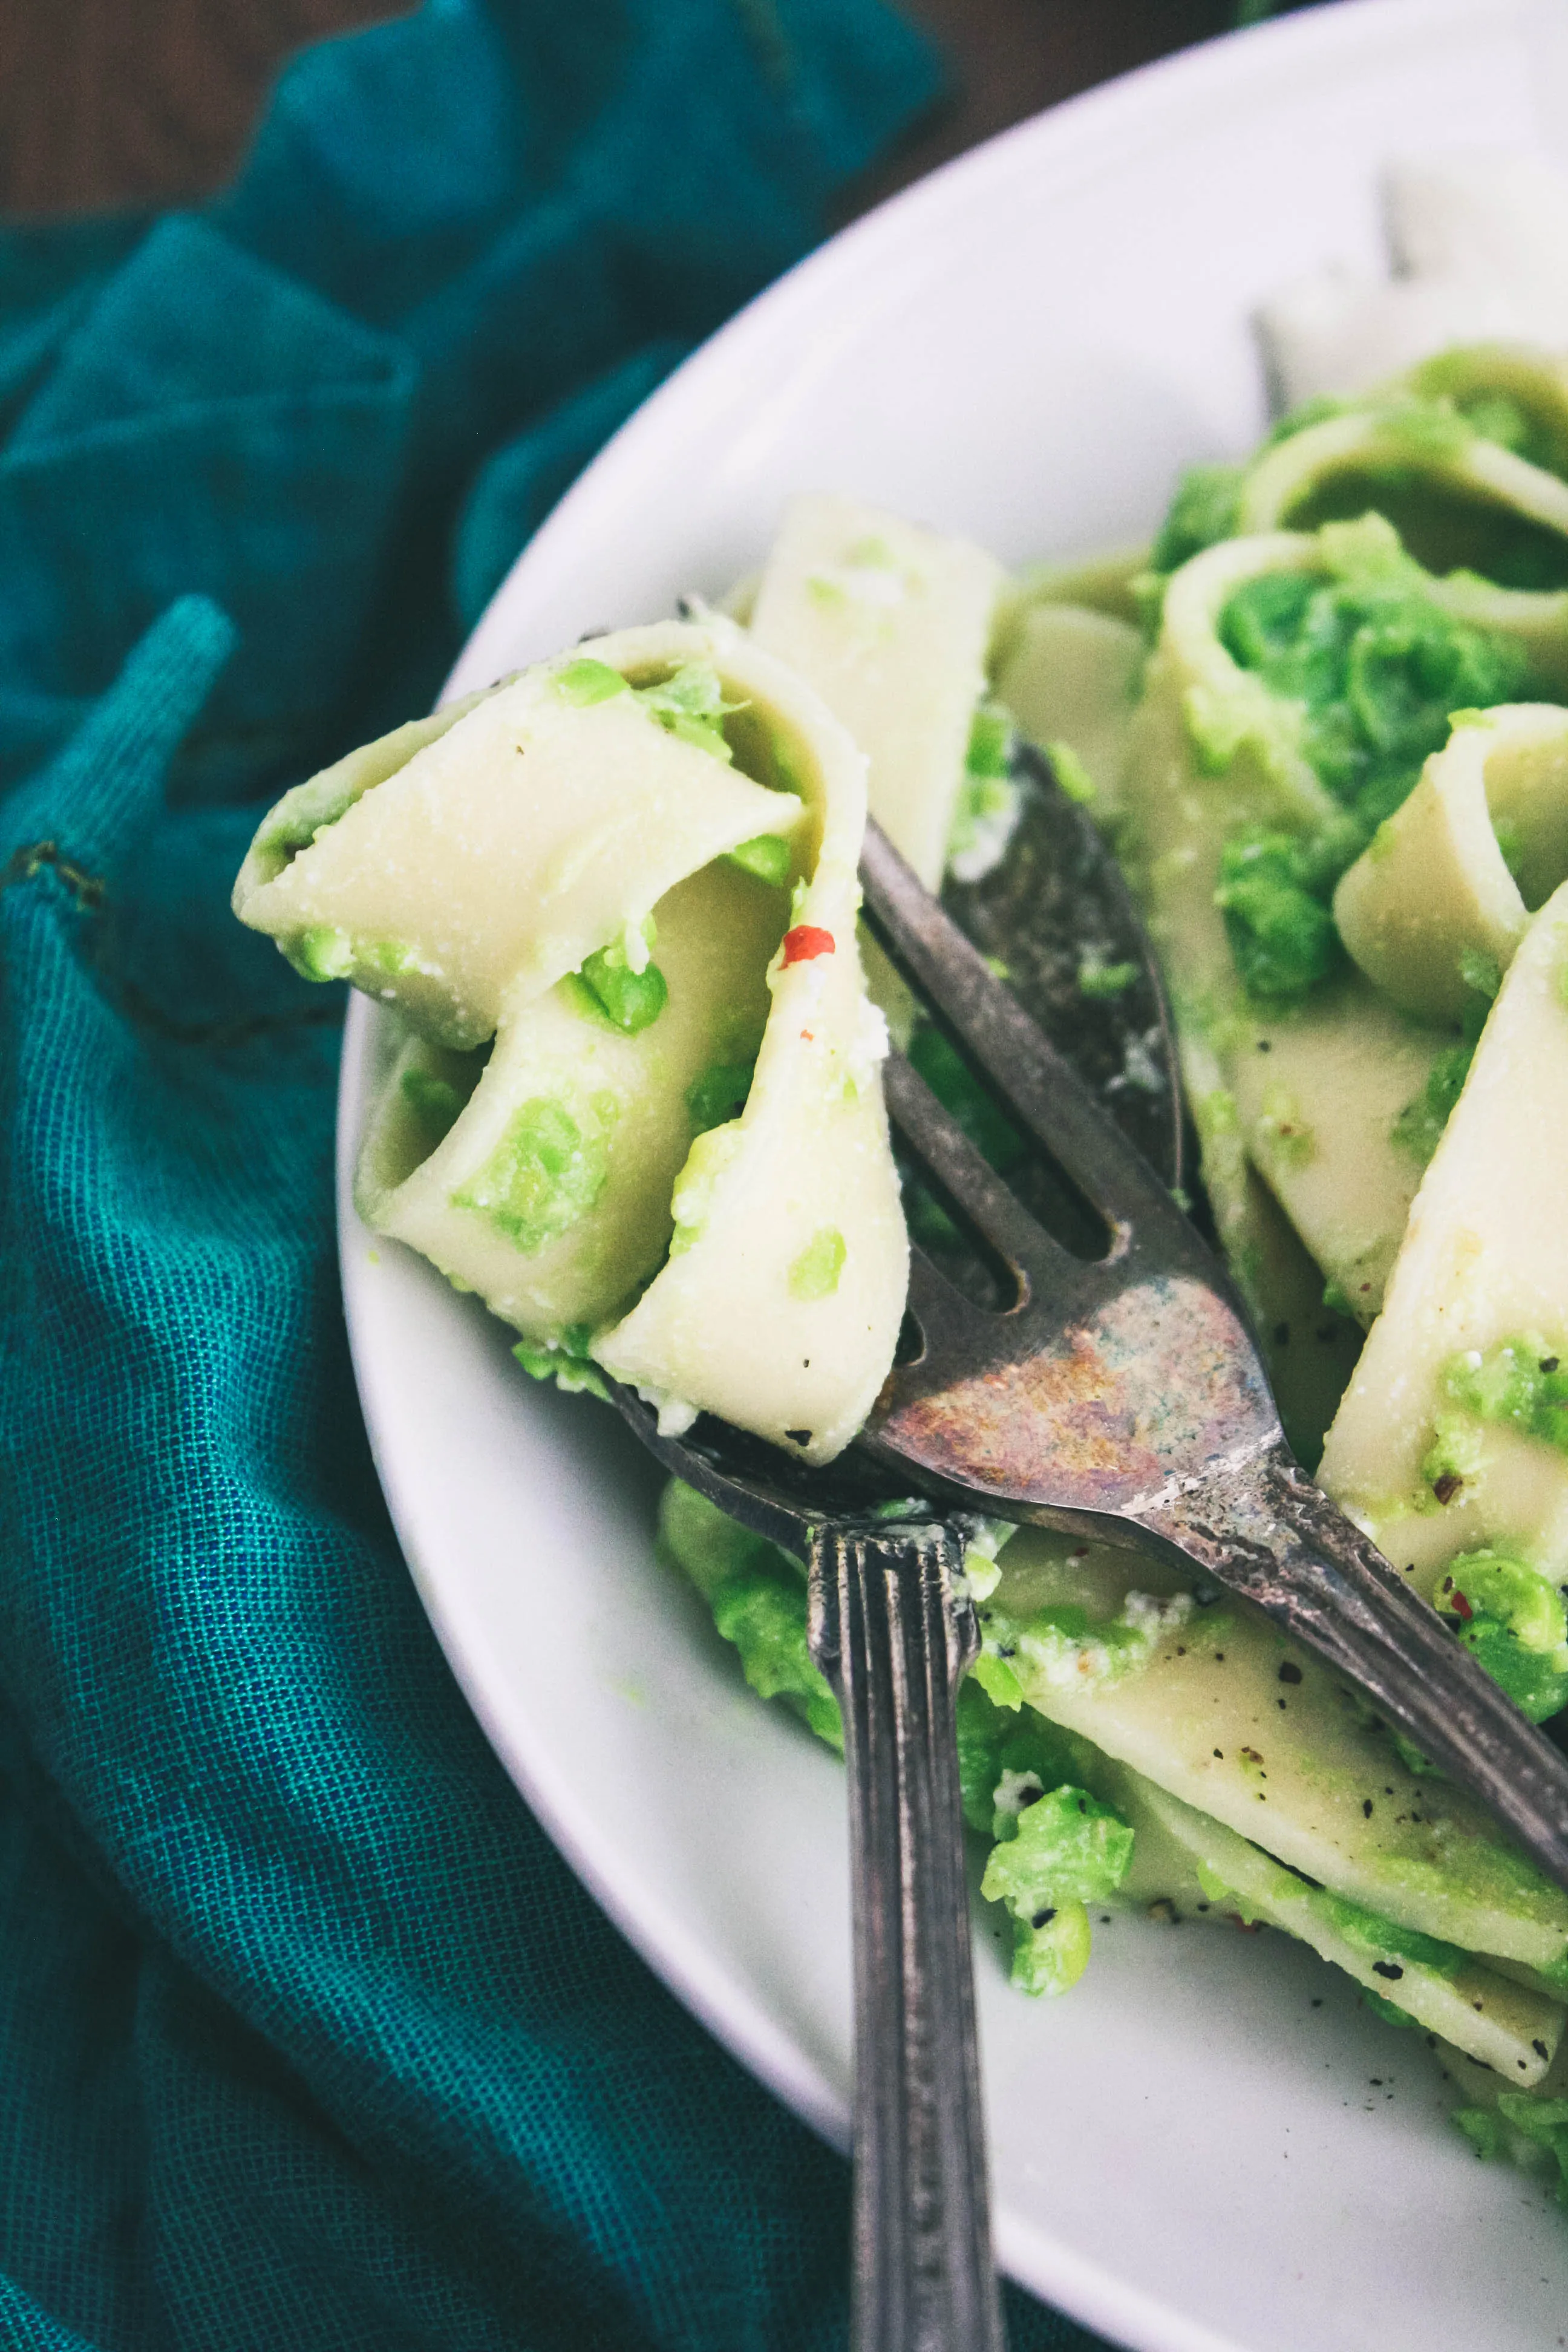 Pasta with Smashed Peas and Ricotta is a great dish to twirl up and enjoy. You'll really like Pasta with Smashed Peas and Ricotta for your next dinner.